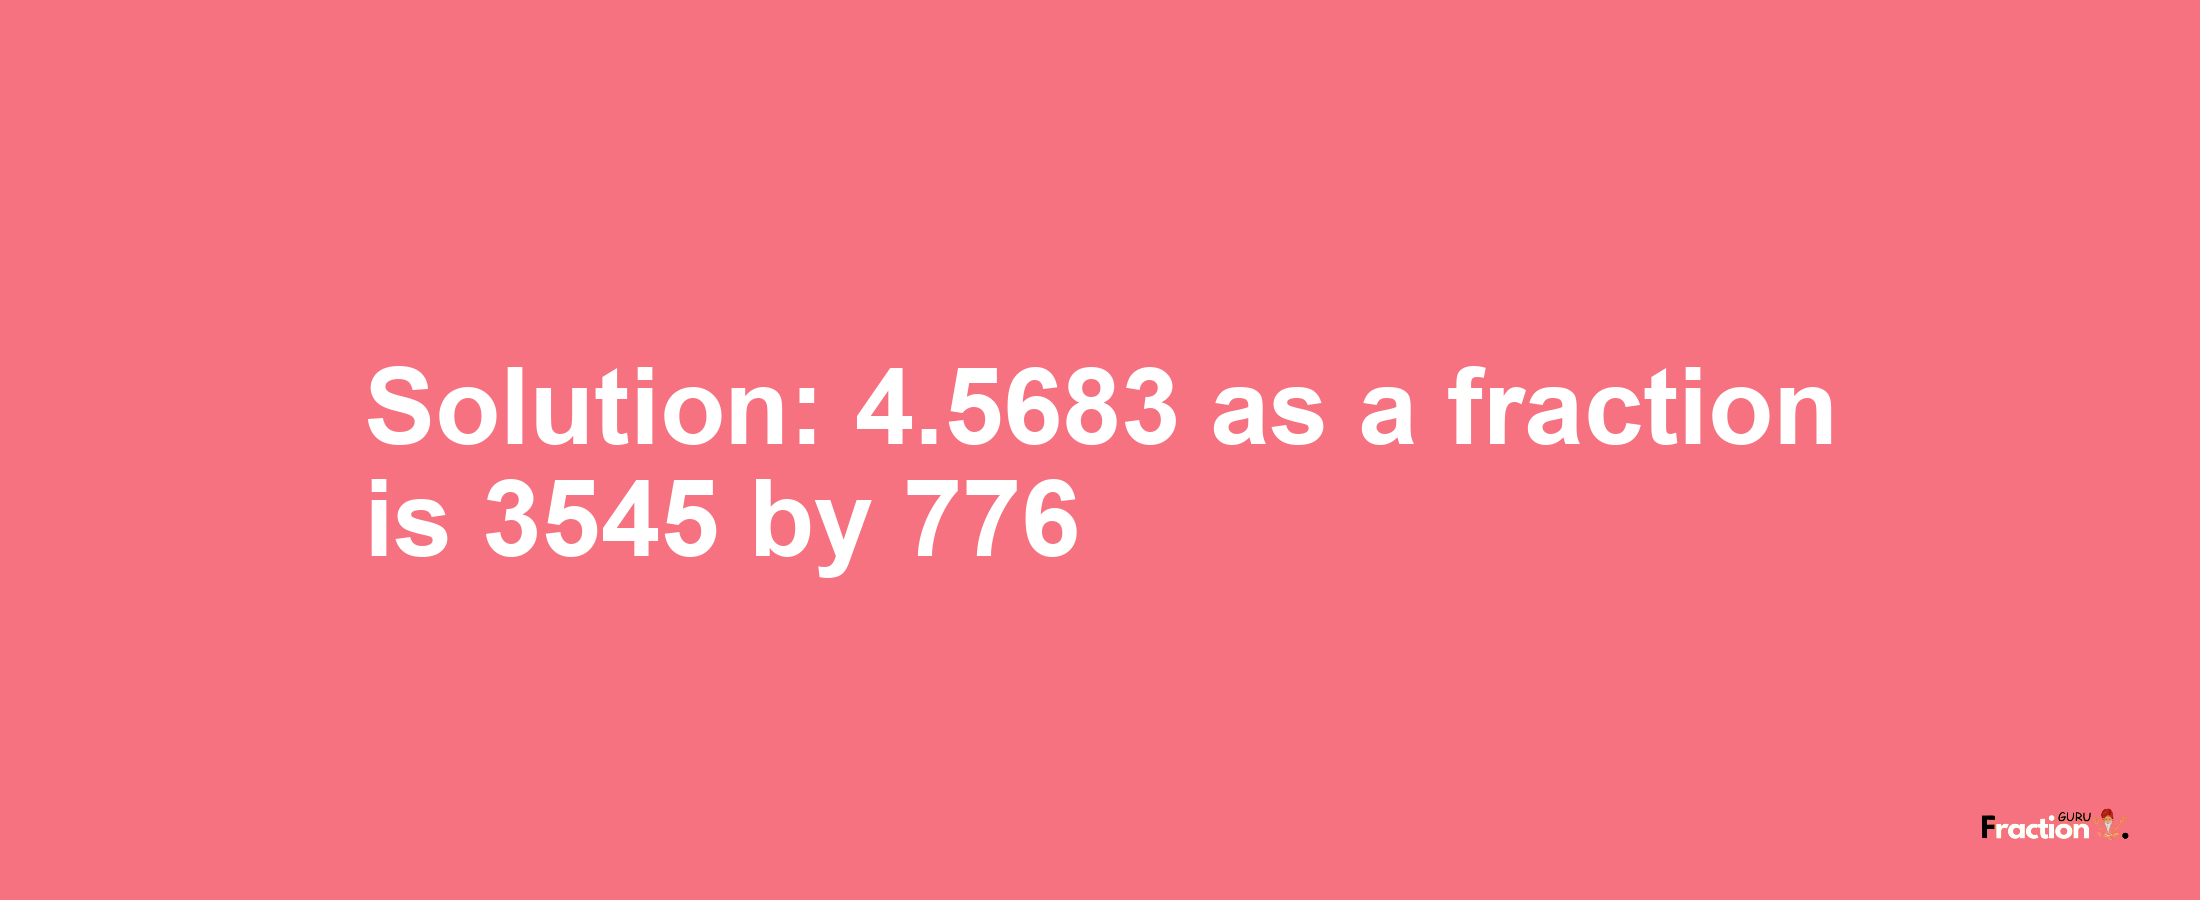 Solution:4.5683 as a fraction is 3545/776